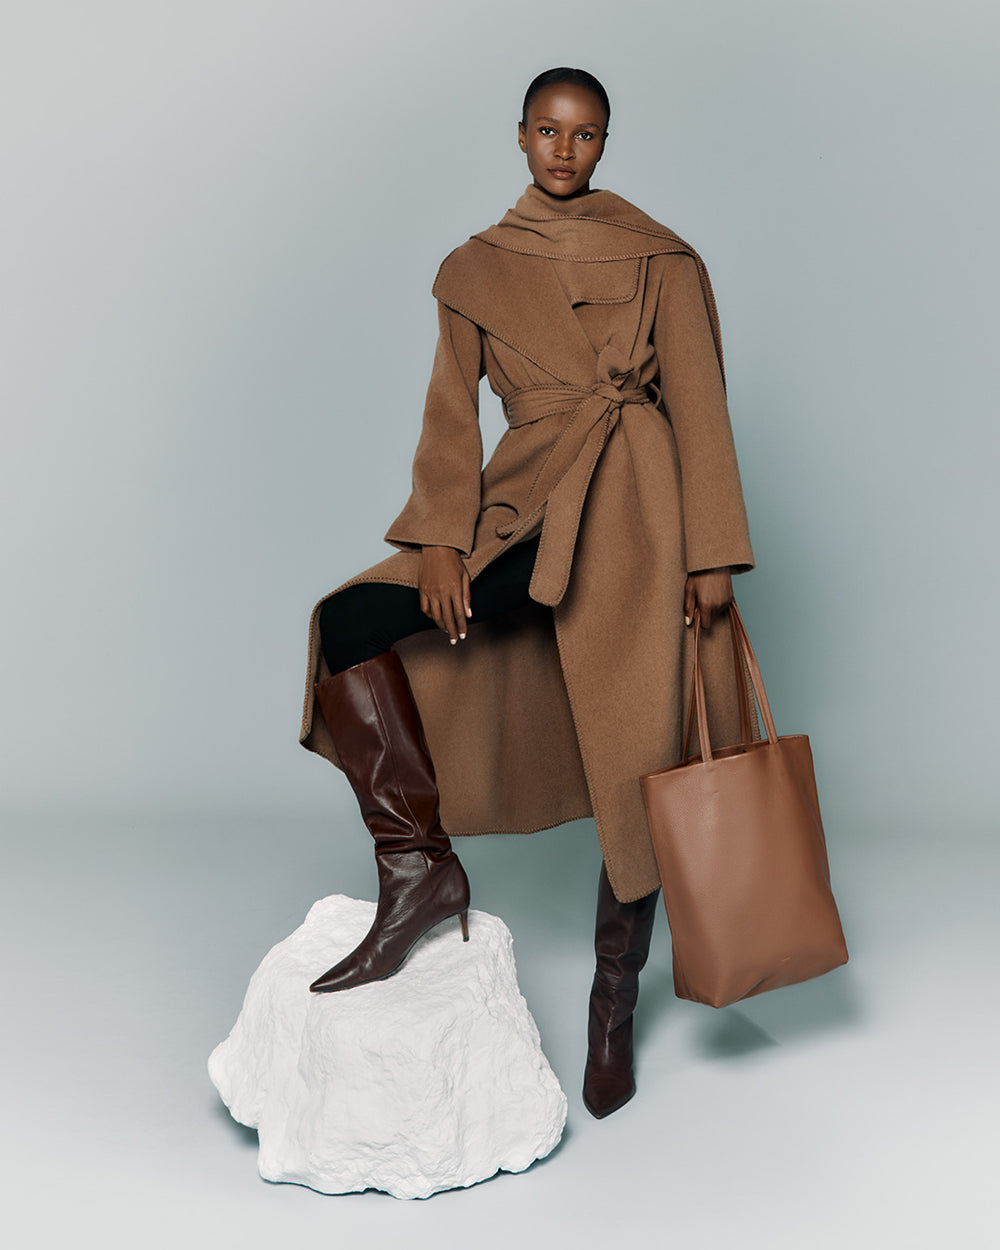 Person in stylish outfit with a coat, boots, and a bag posing with one foot on a rock.